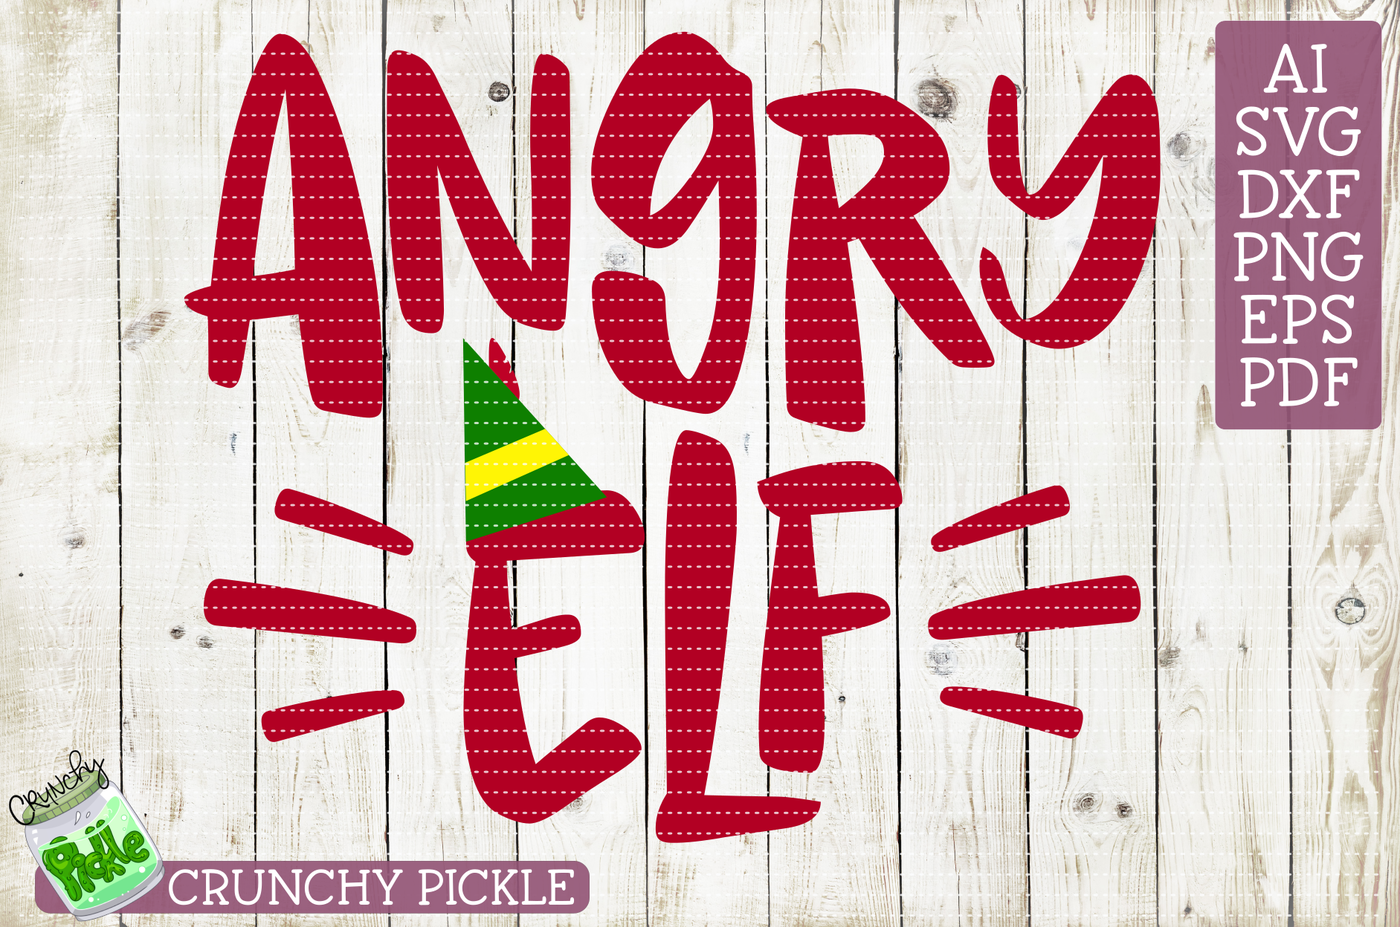 Angry Elf Svg Cutting File By Crunchy Pickle Thehungryjpeg Com